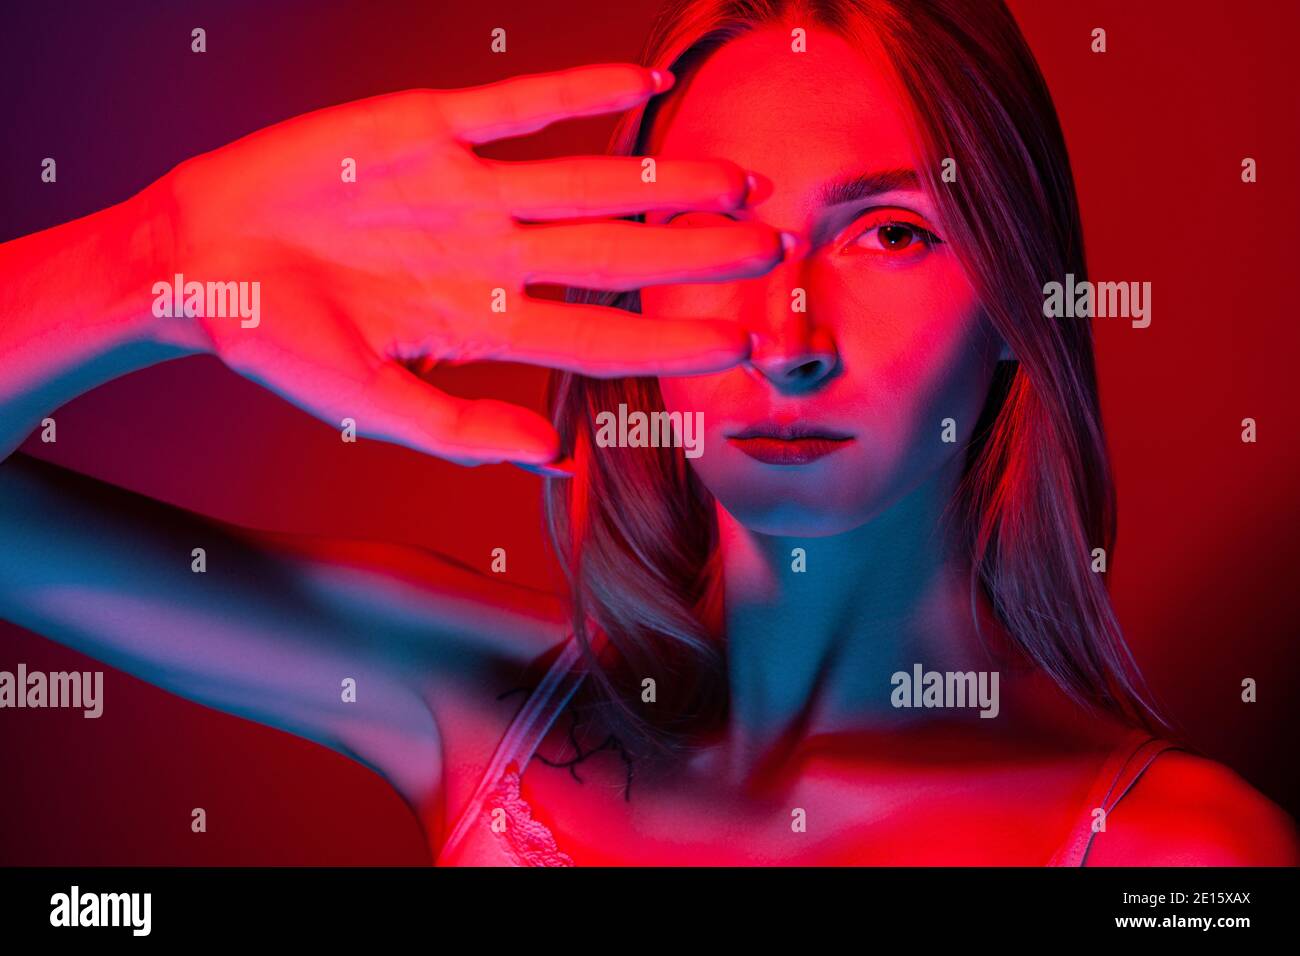 Unemotional young female covering eyes with hand in studio with red light Stock Photo